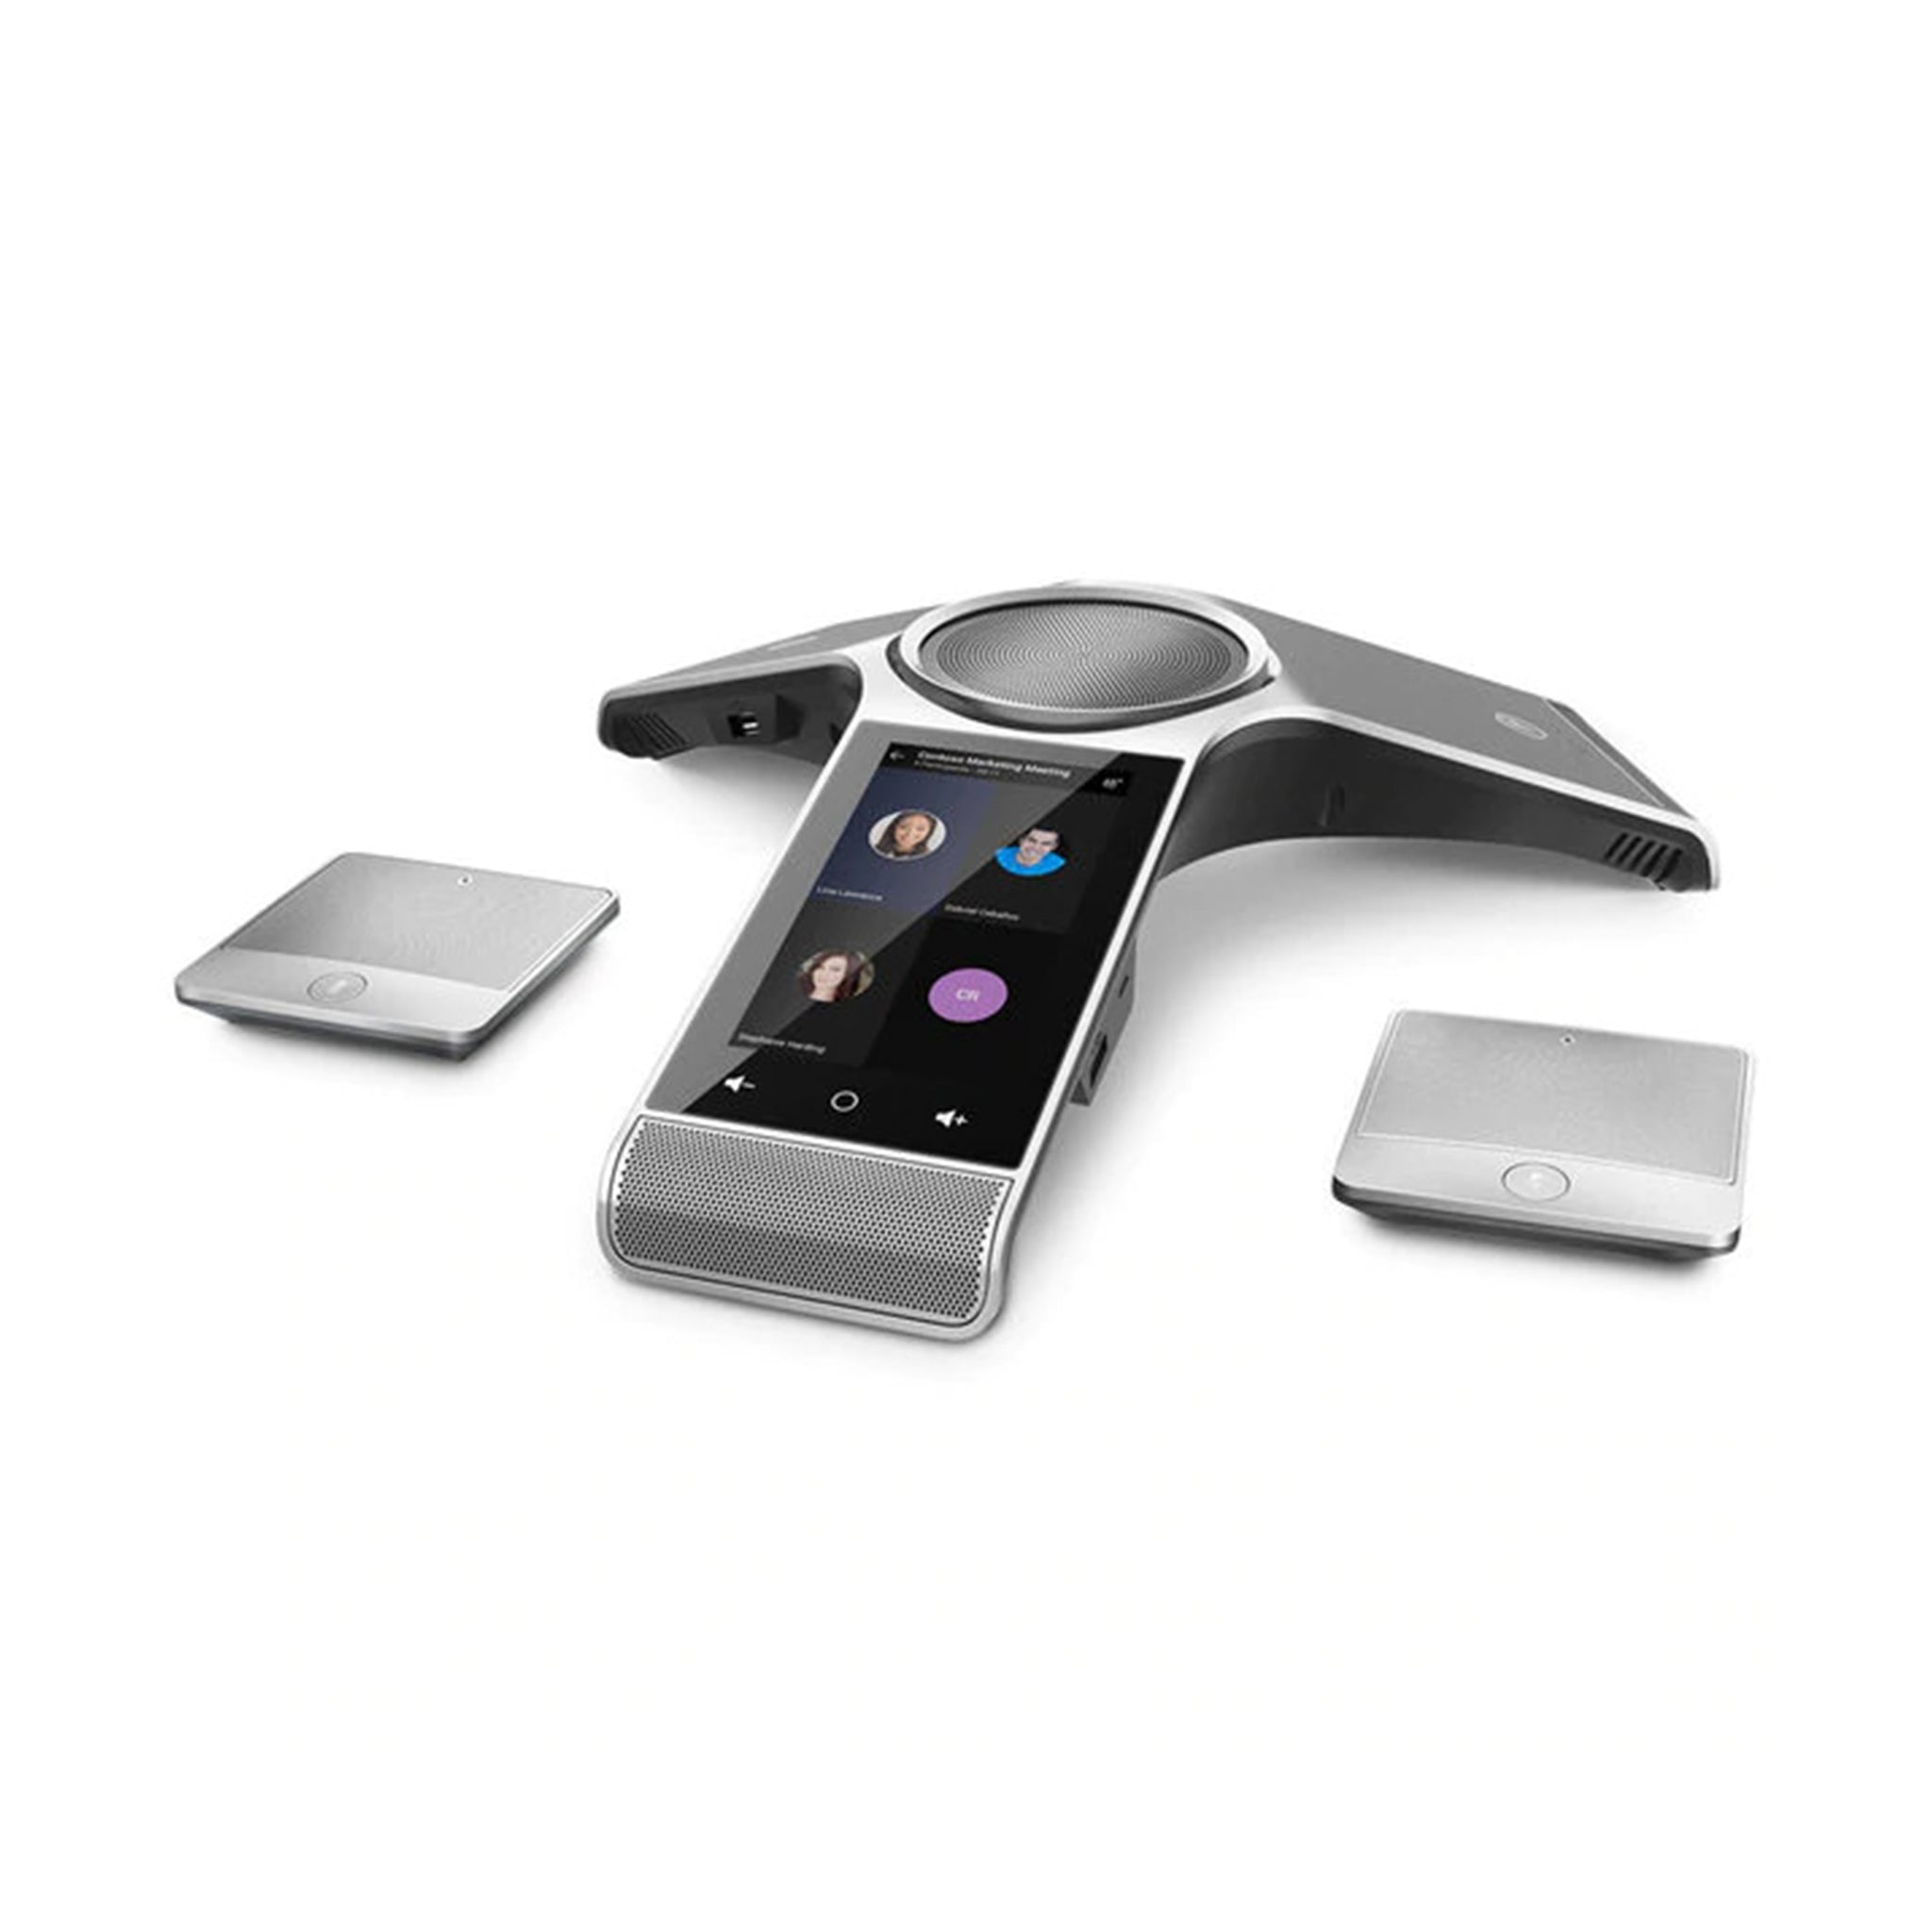 Yealink CP960 Conference Phone, Teams Edition, Wireless Mic, Touchscreen | AL-VoIP Store